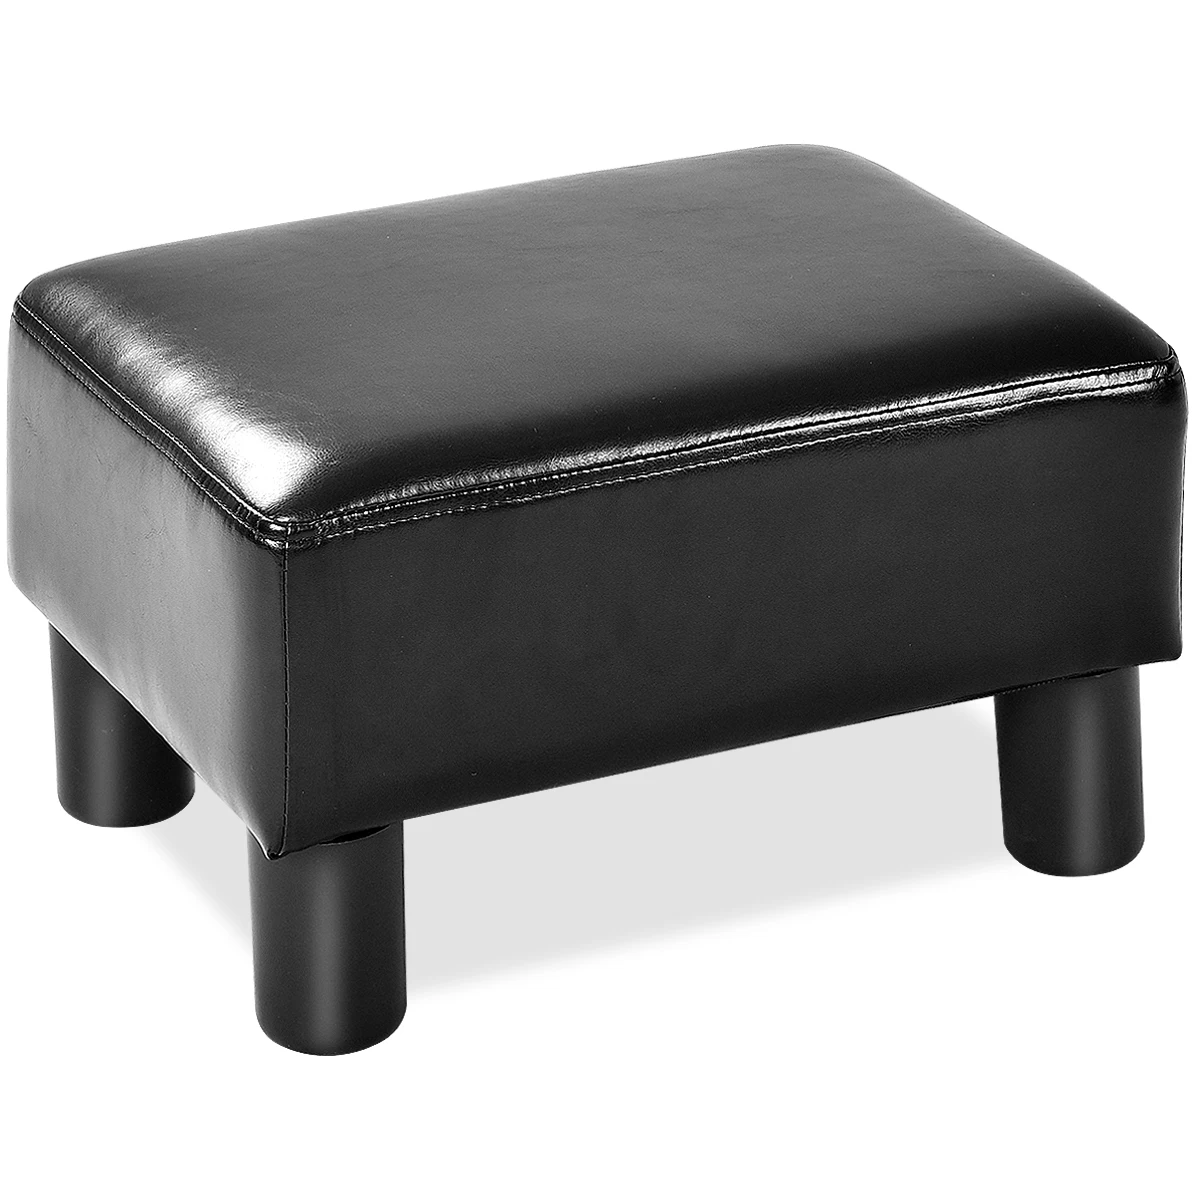 

PU Leather Ottoman Footrest Small Stool Rectangular with Padded Seat Black